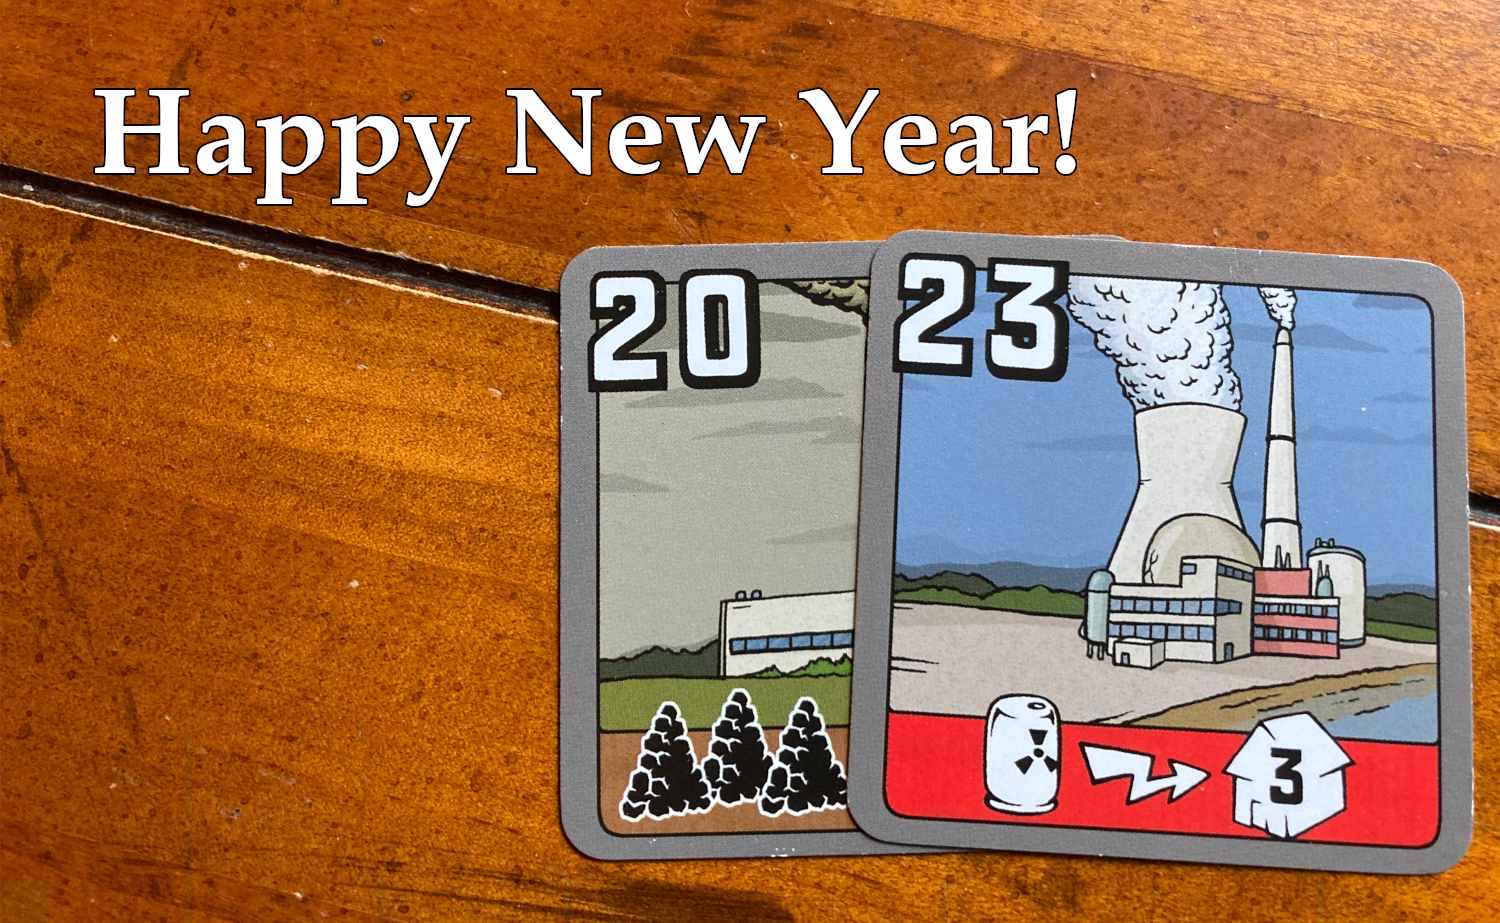 Happy New Year text with picture of two power plants from the game Power Grid that are 20 and 23 numbers